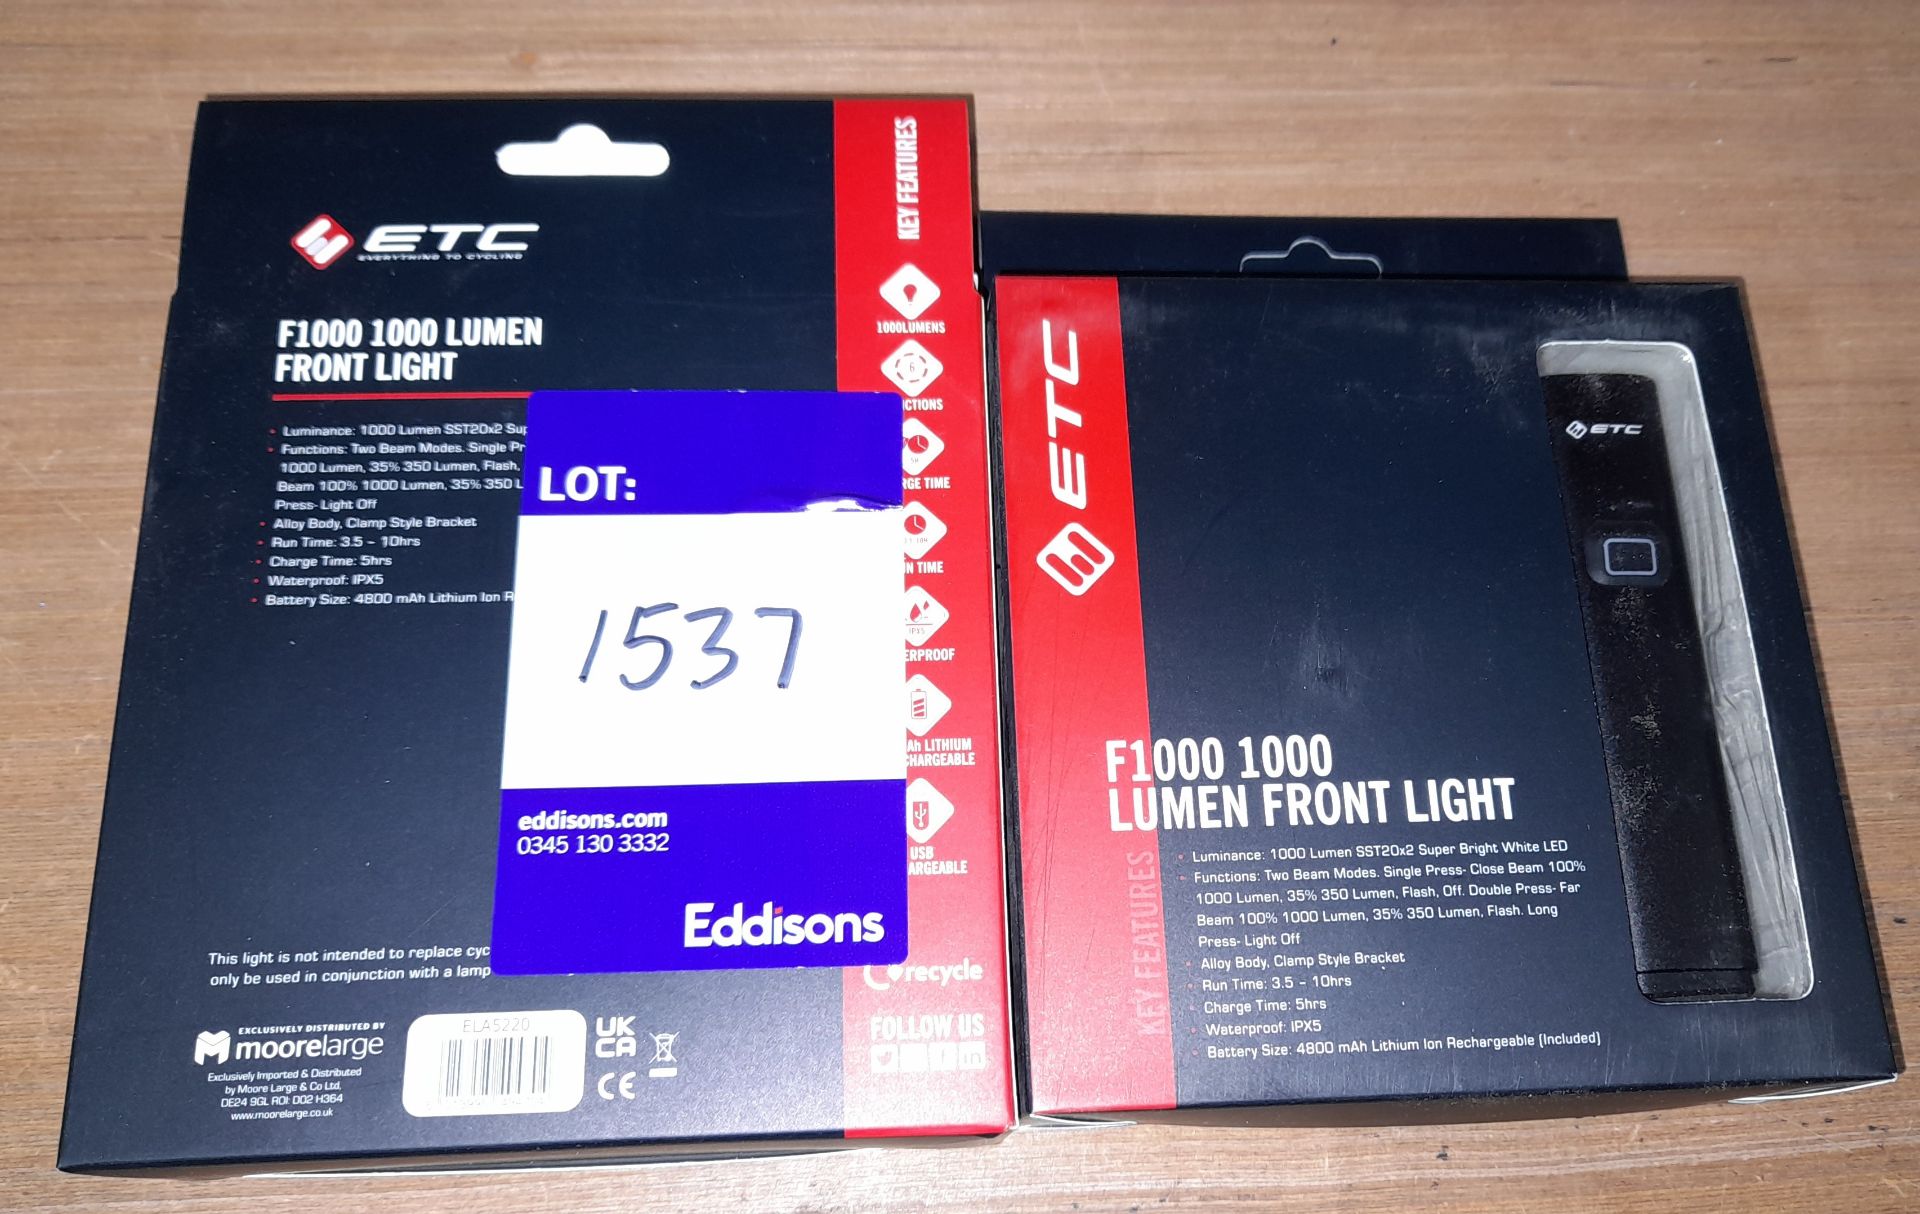 2 x ETC F1000 1000 Lumen Front Light (This lot forms part of composite lot 1621 and at the end of - Image 2 of 2